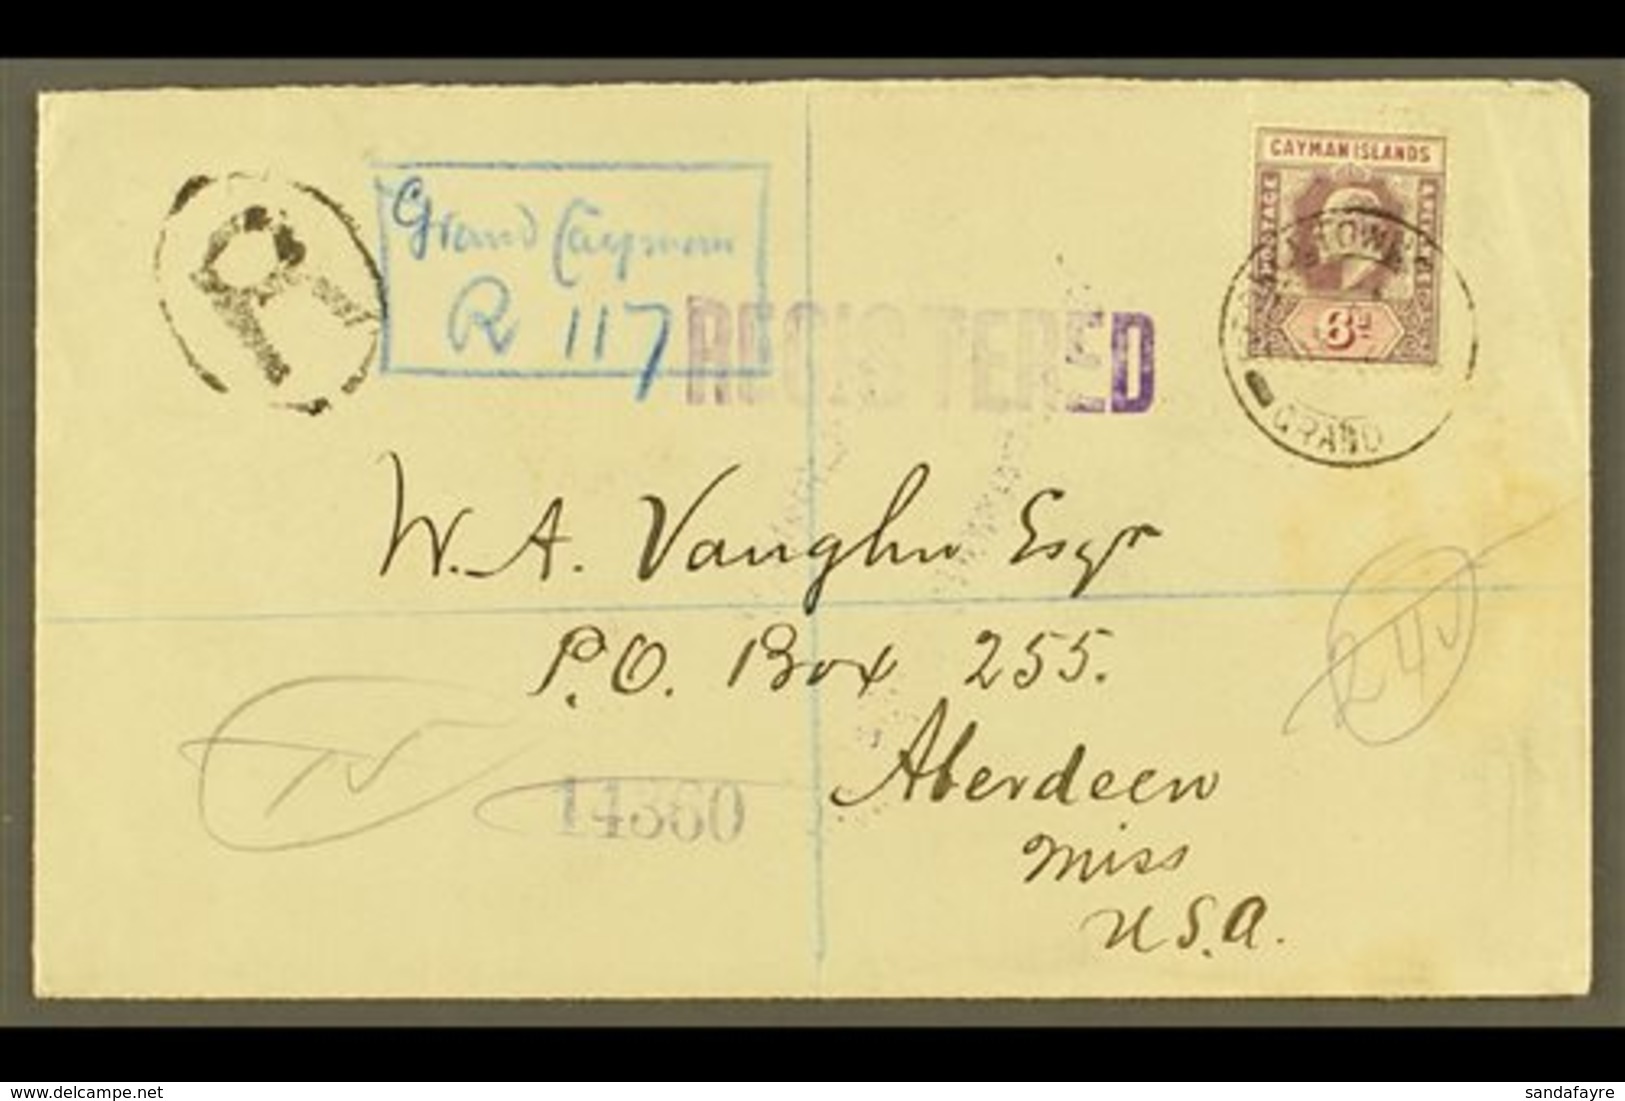 1916 (24 Jan) Registered Cover To USA, Bearing 1907-09 6d Stamp (SG 30) Tied By "George Town" Cds, With Registration Cac - Cayman Islands